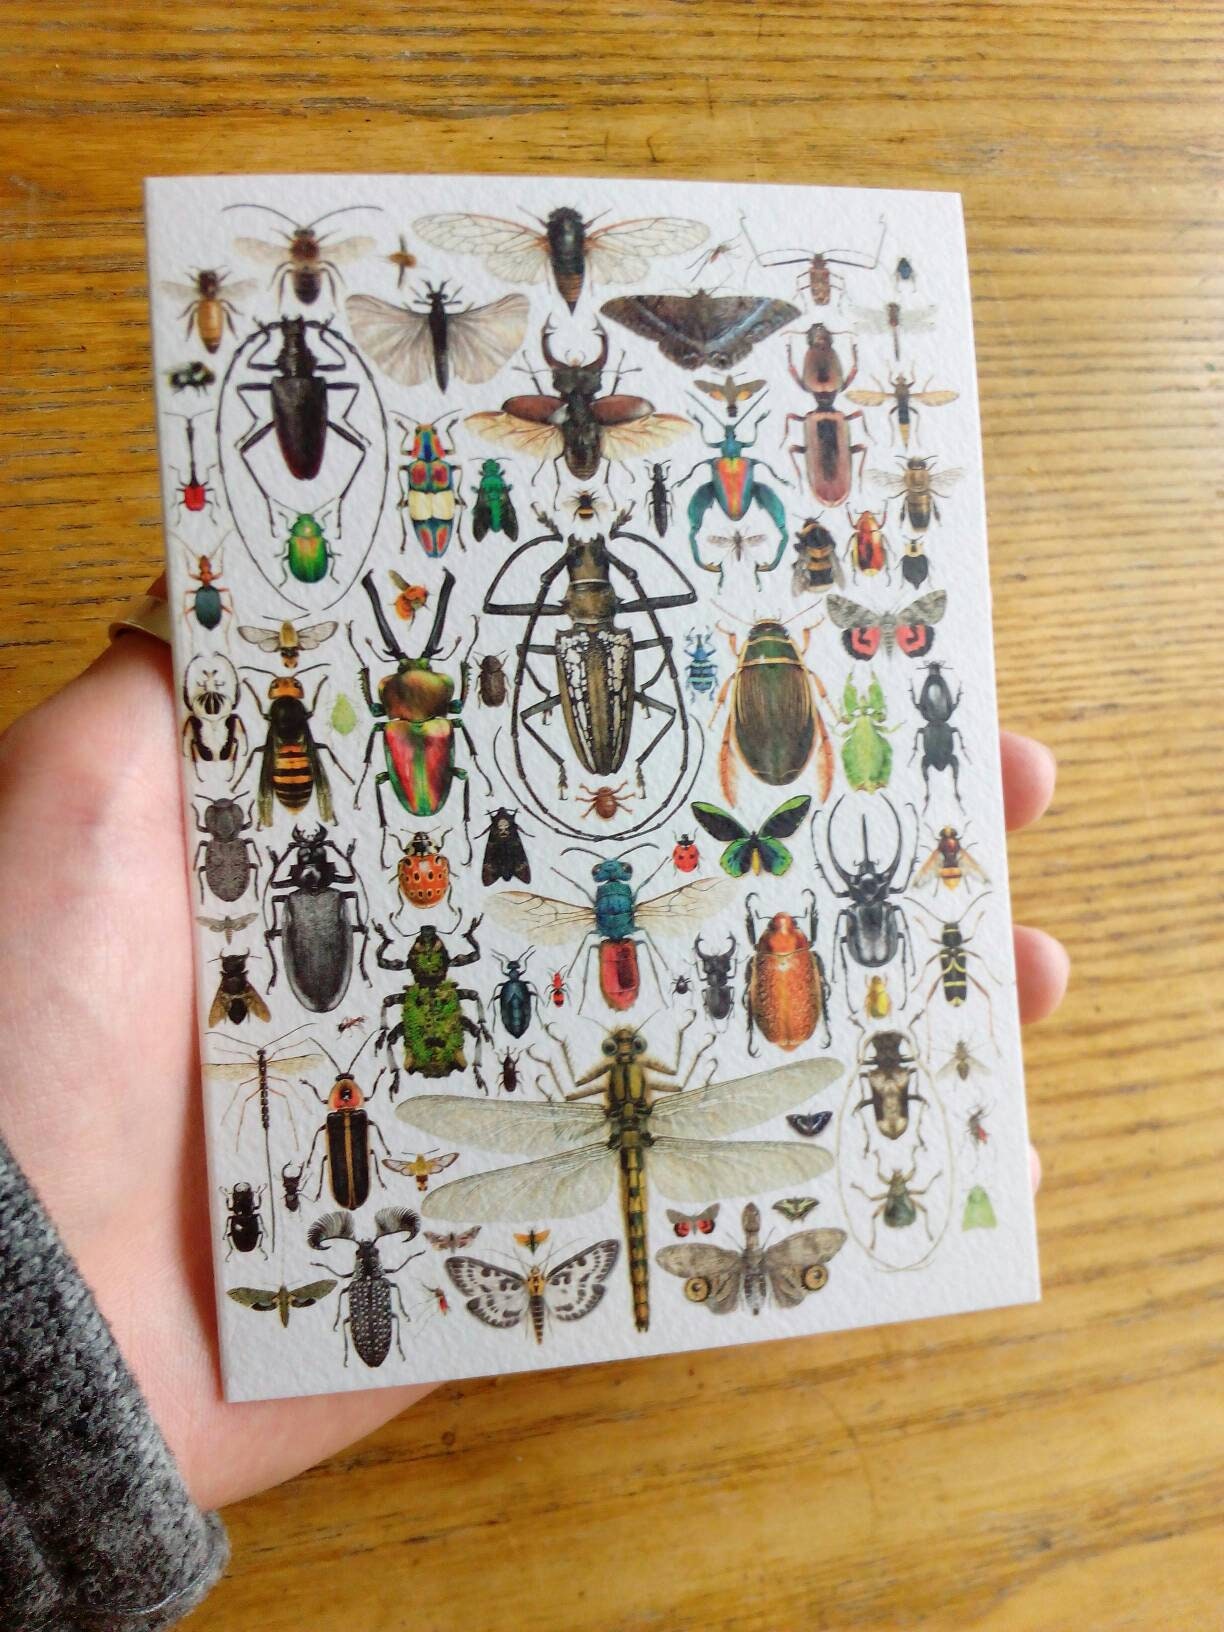 Insect compilation greetings card